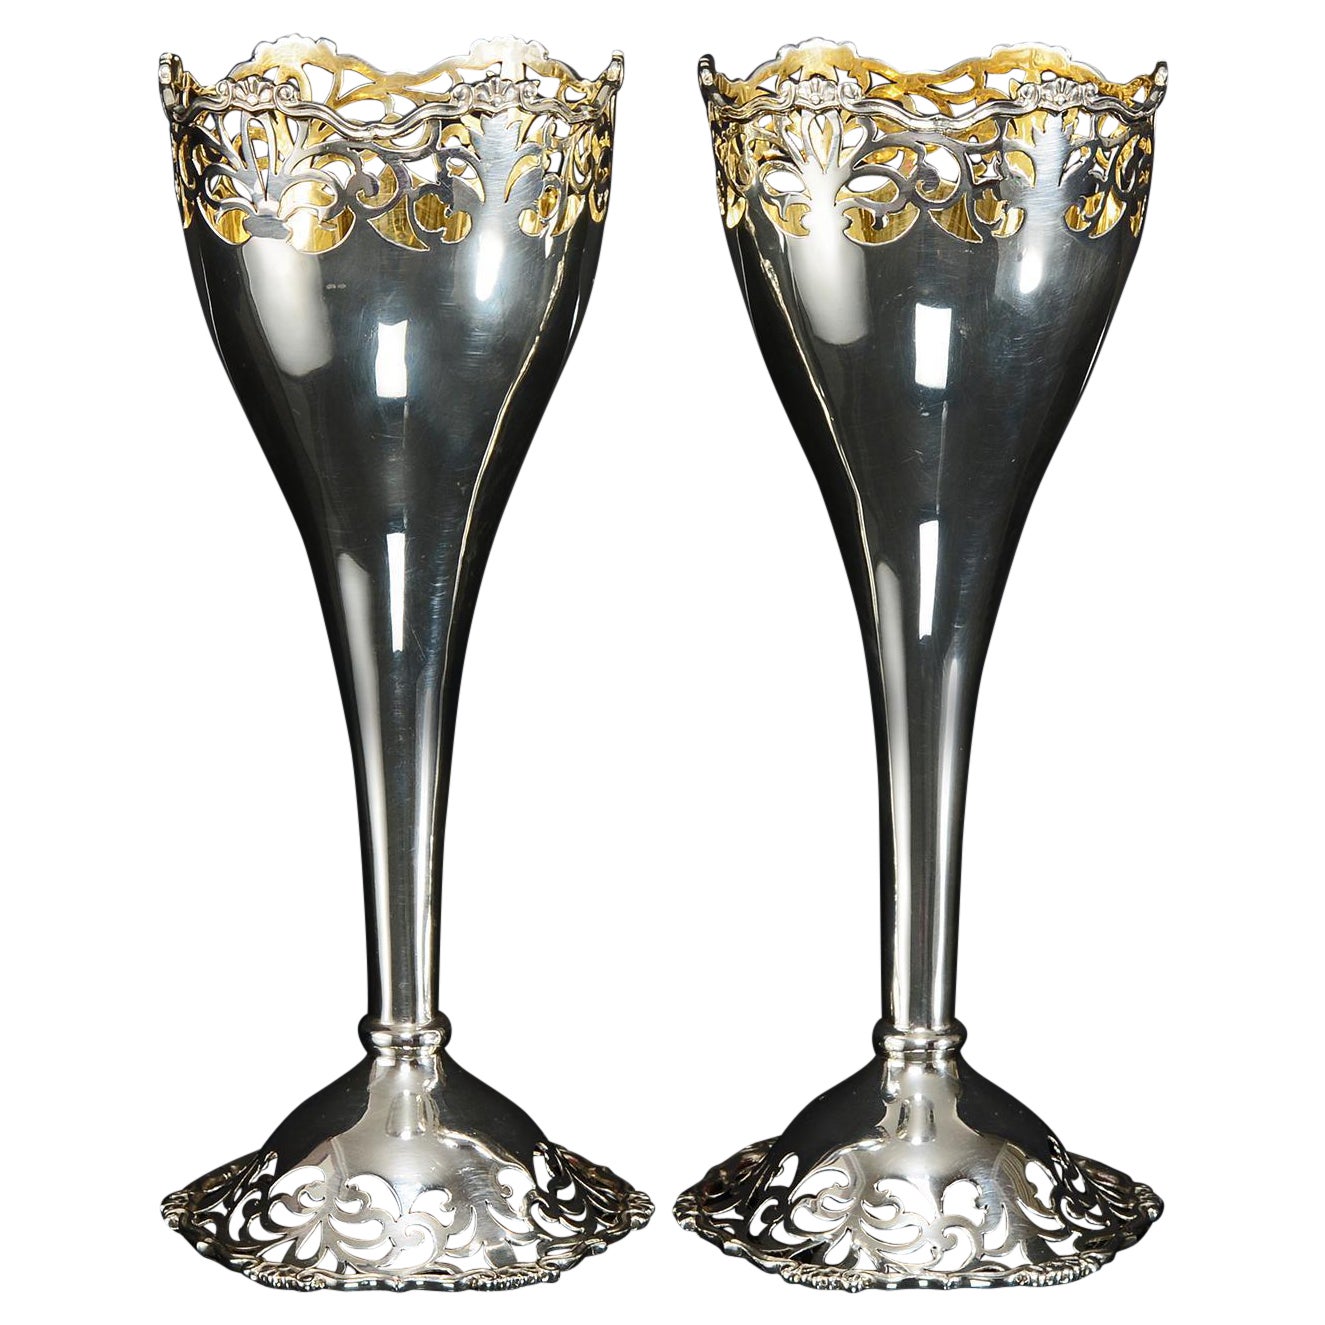 Pair of Antique Silver Vases with Hand-Pierced Decoration